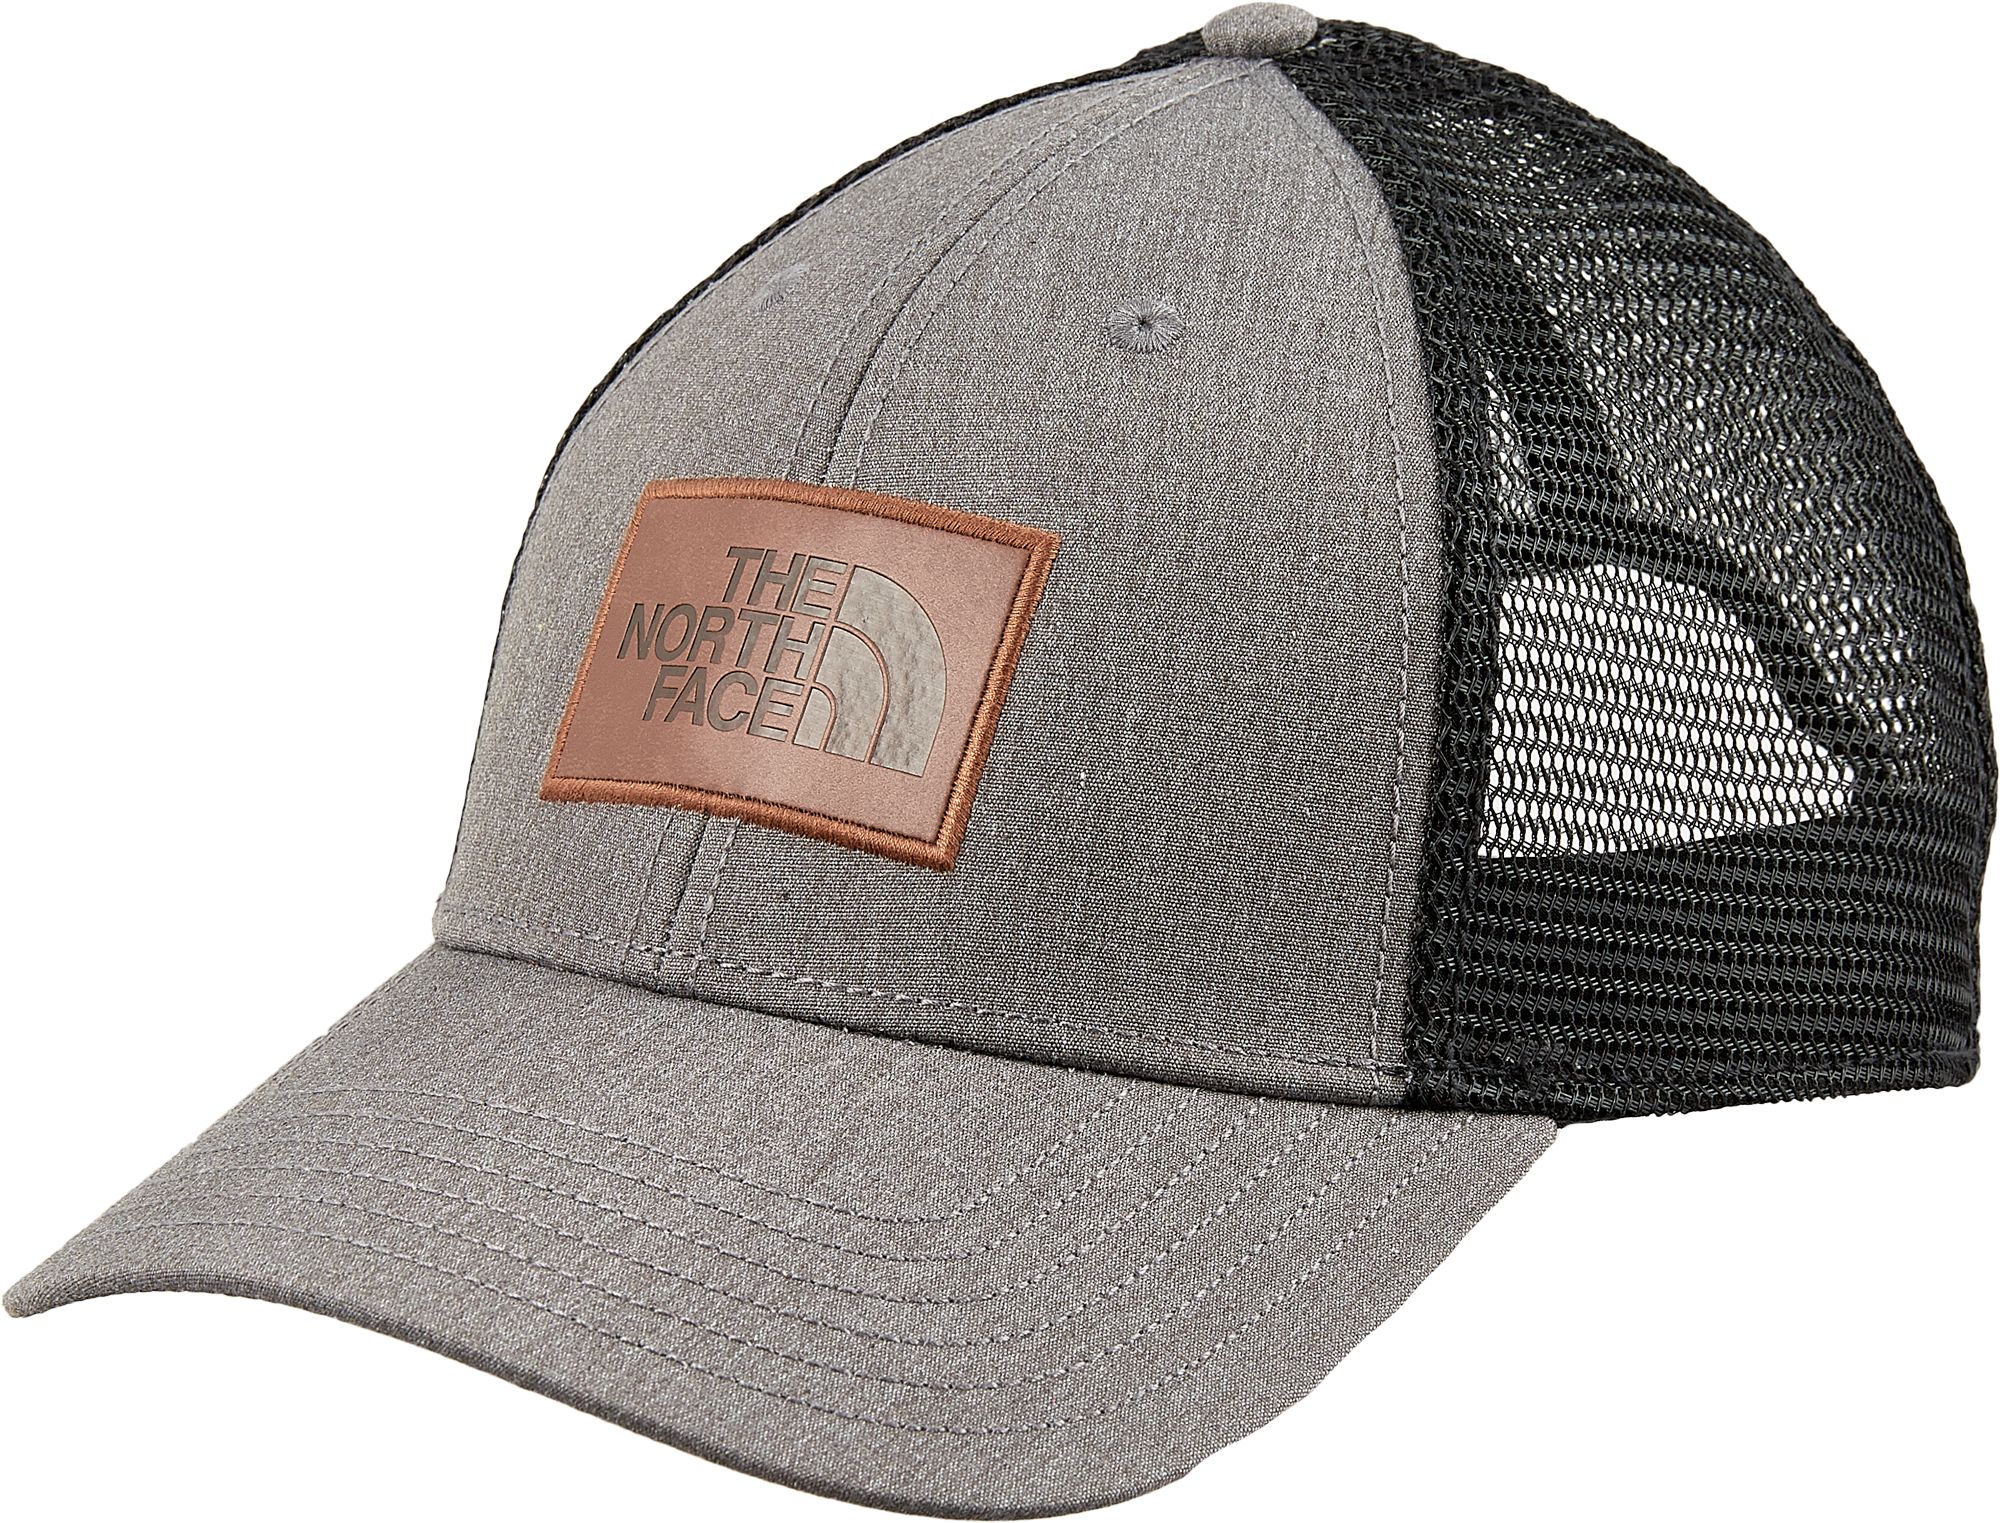 Leather Dome Trucker Hat 